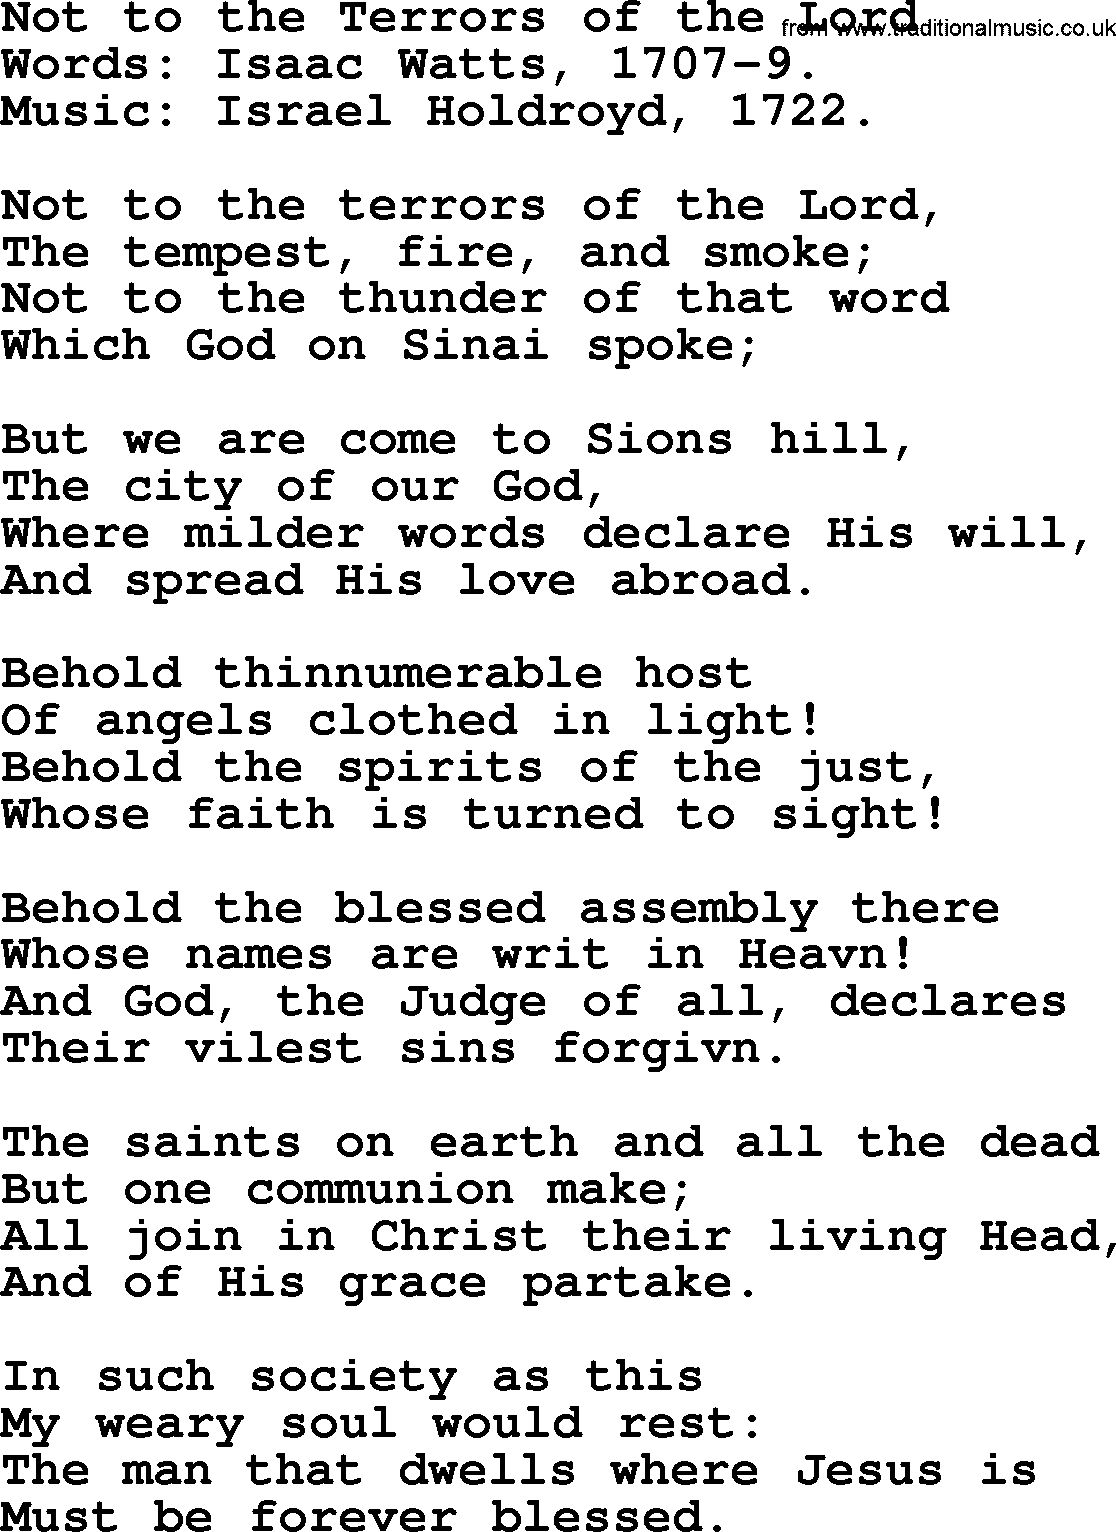 Isaac Watts Christian hymn: Not to the Terrors of the Lord- lyricss